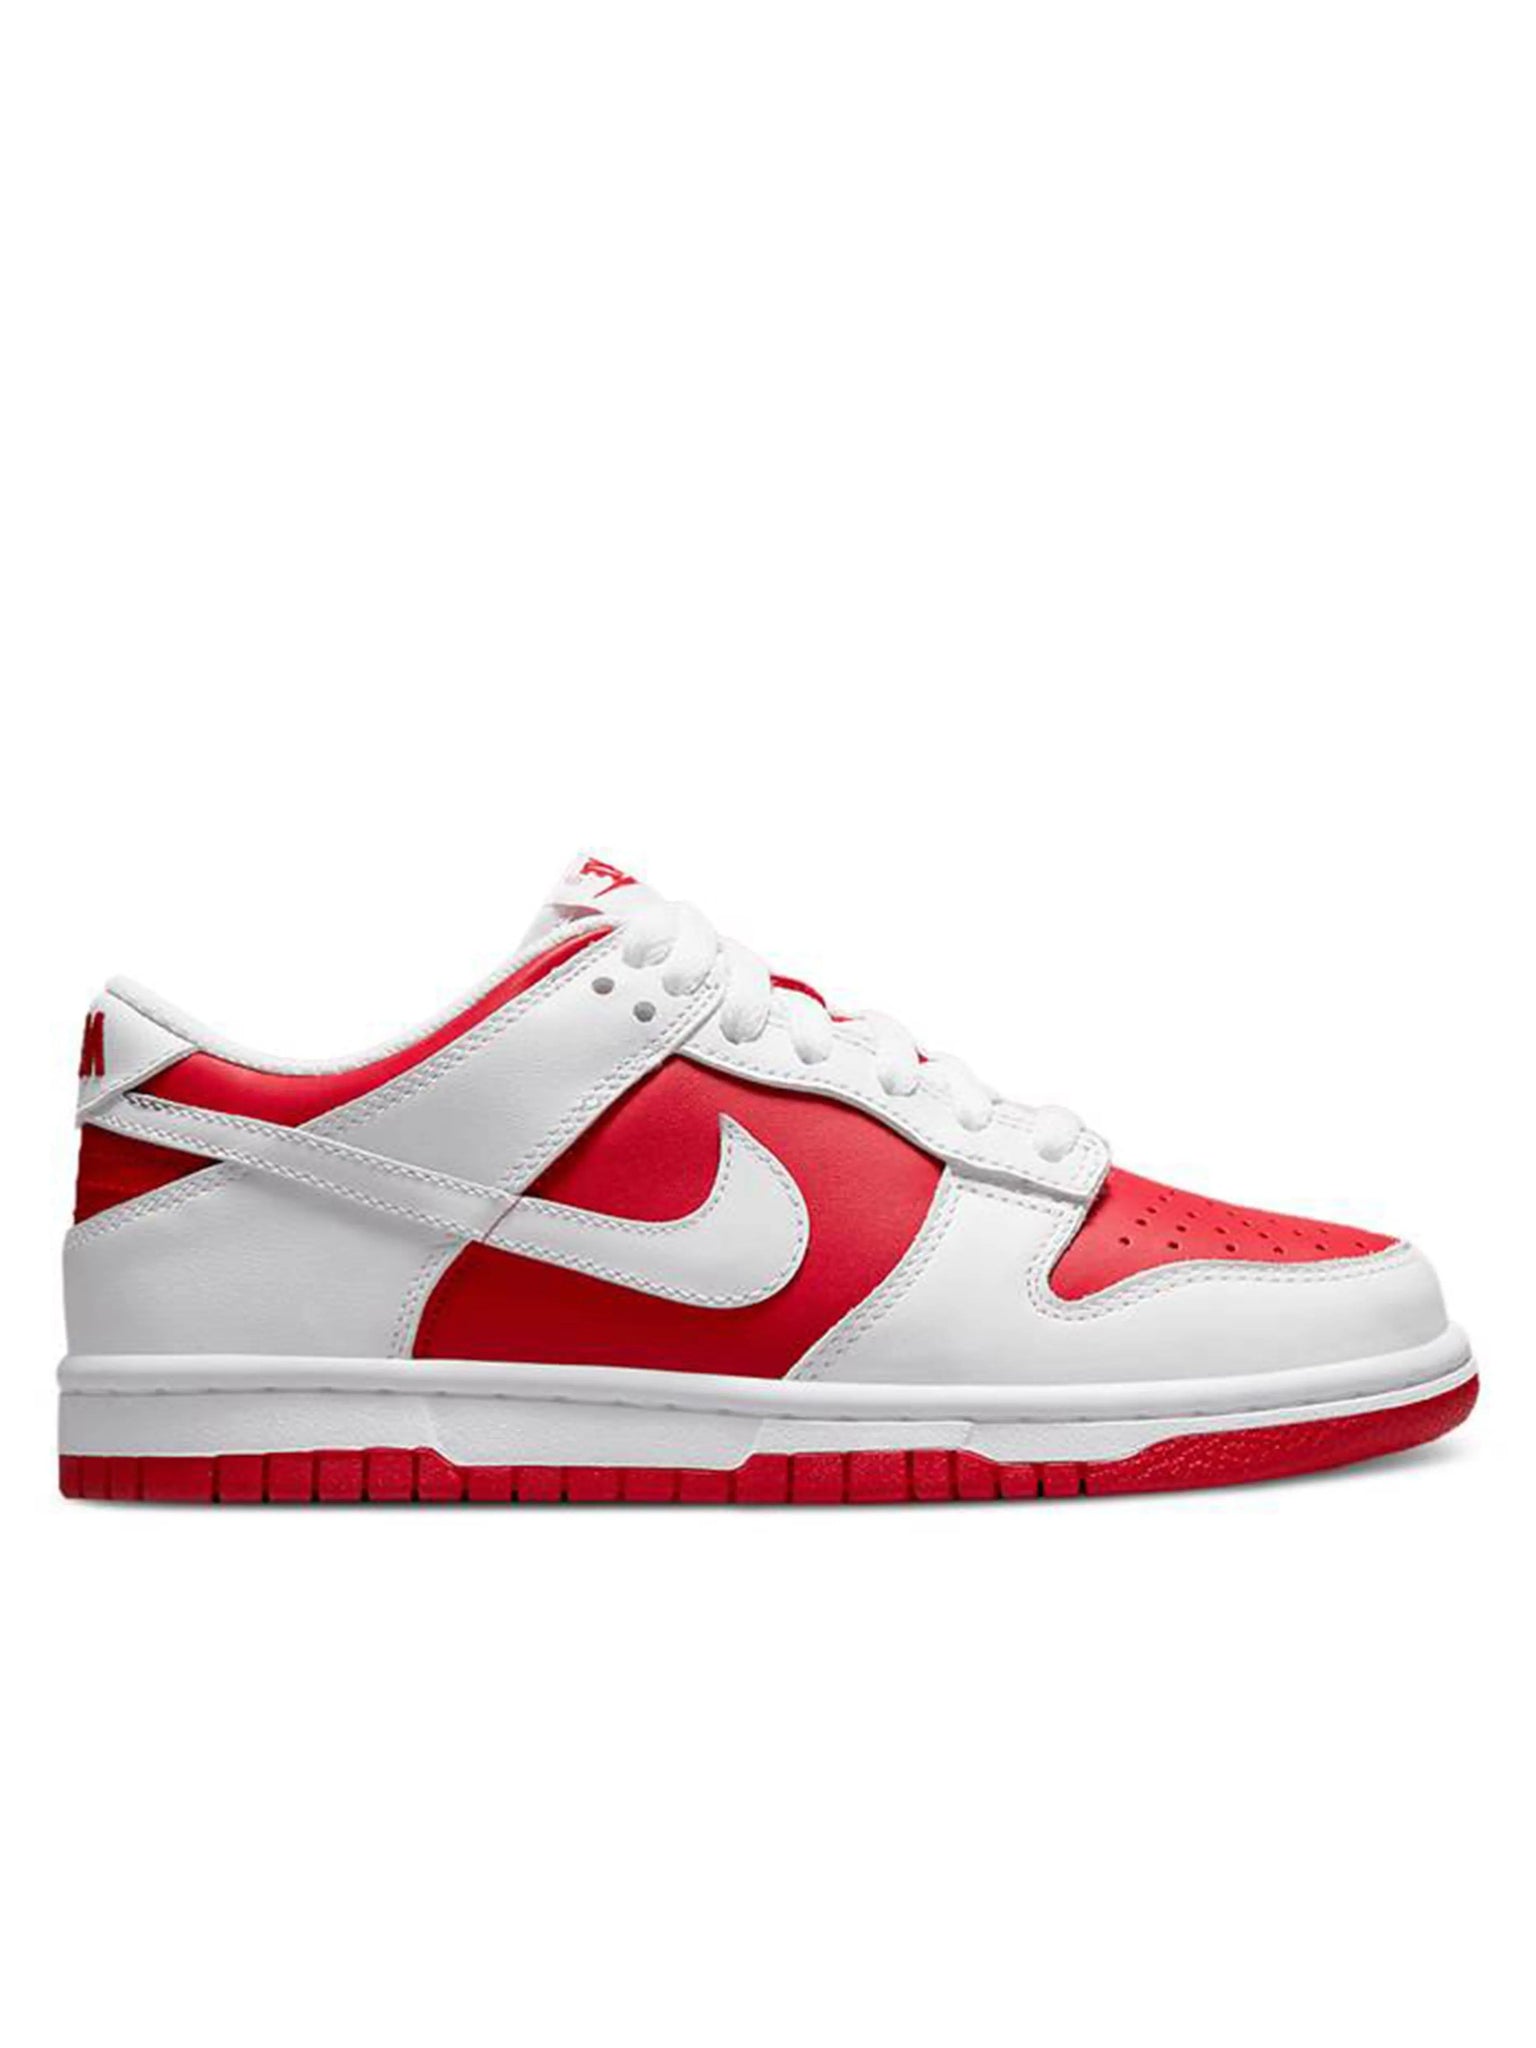 Nike Dunk Low Championship Red Prior